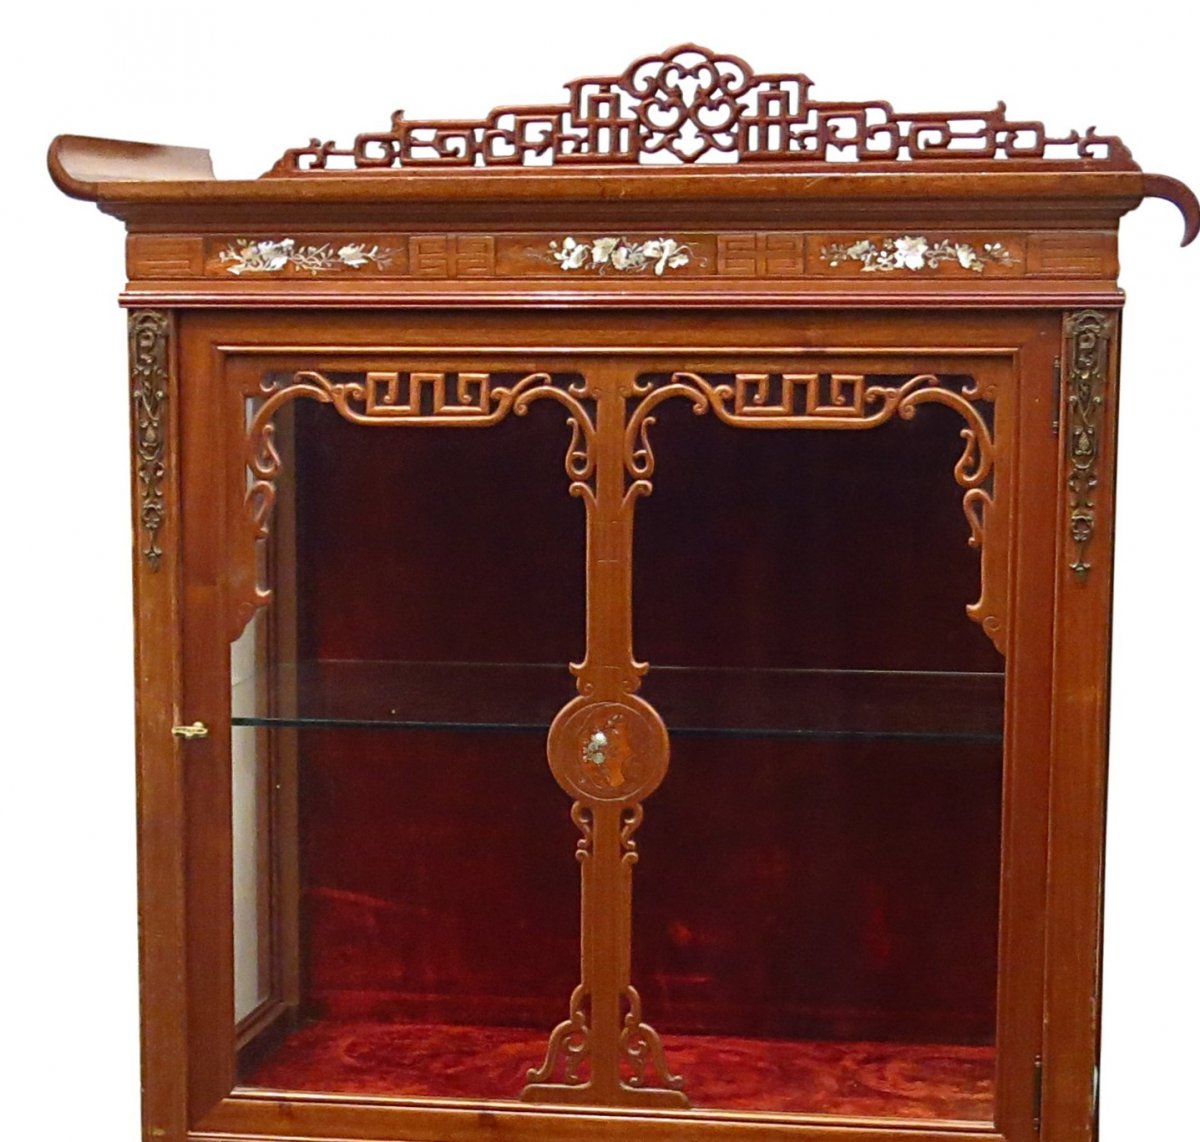 Chinese-style Mahogany And Beijing Lacquer Display Case, End Of 19th Century.-photo-2